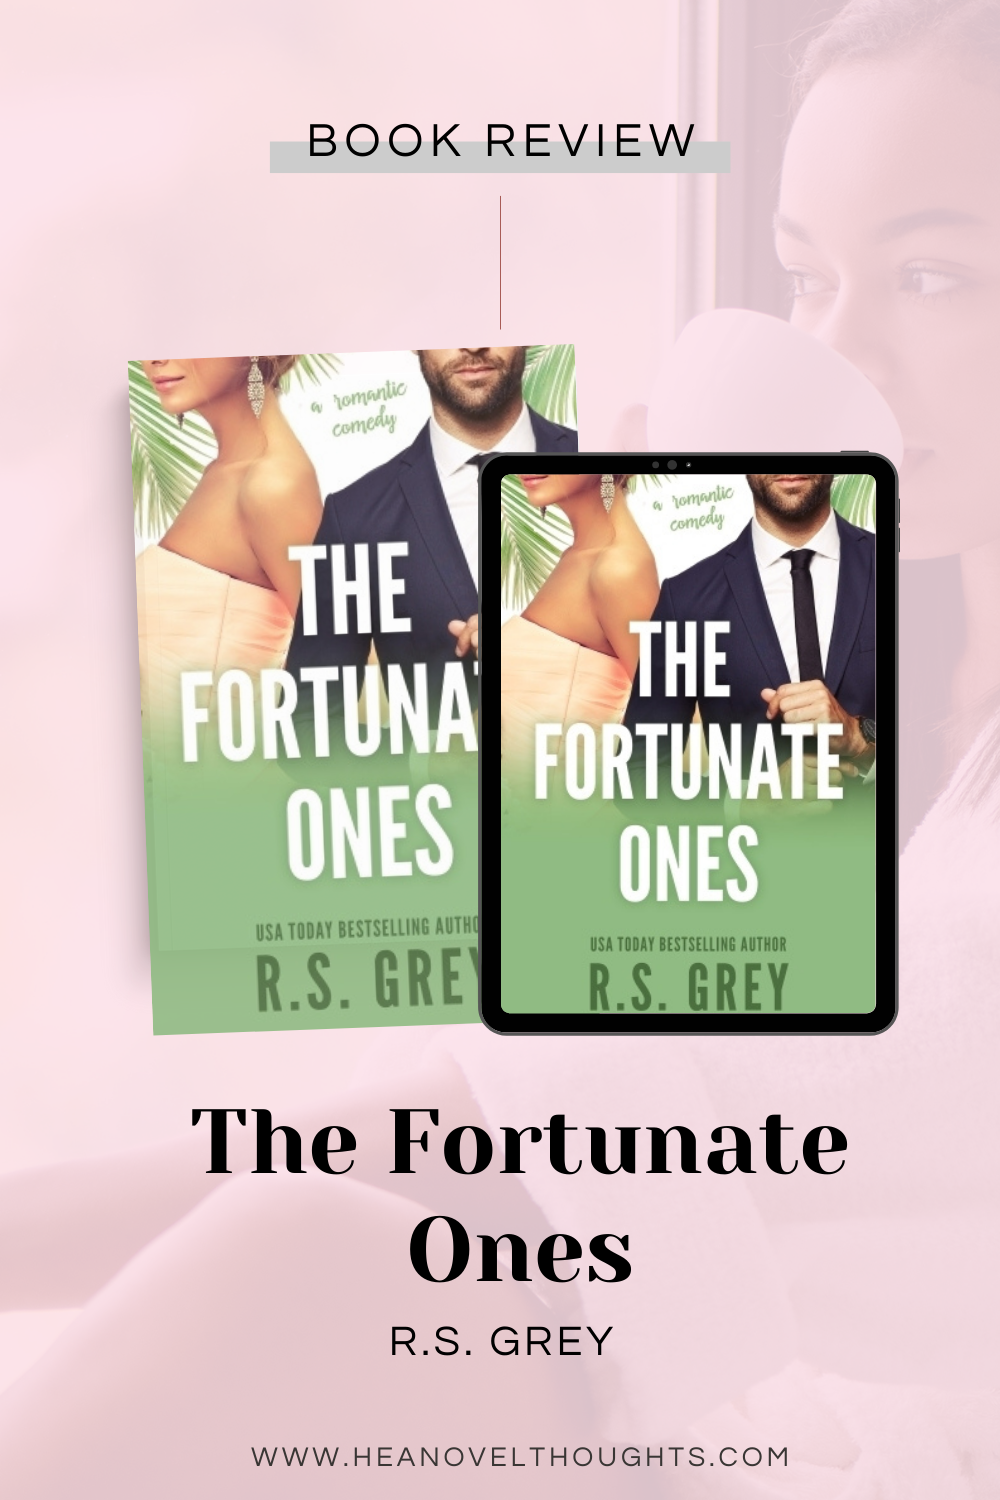 The Fortunate Ones by R.S. Grey